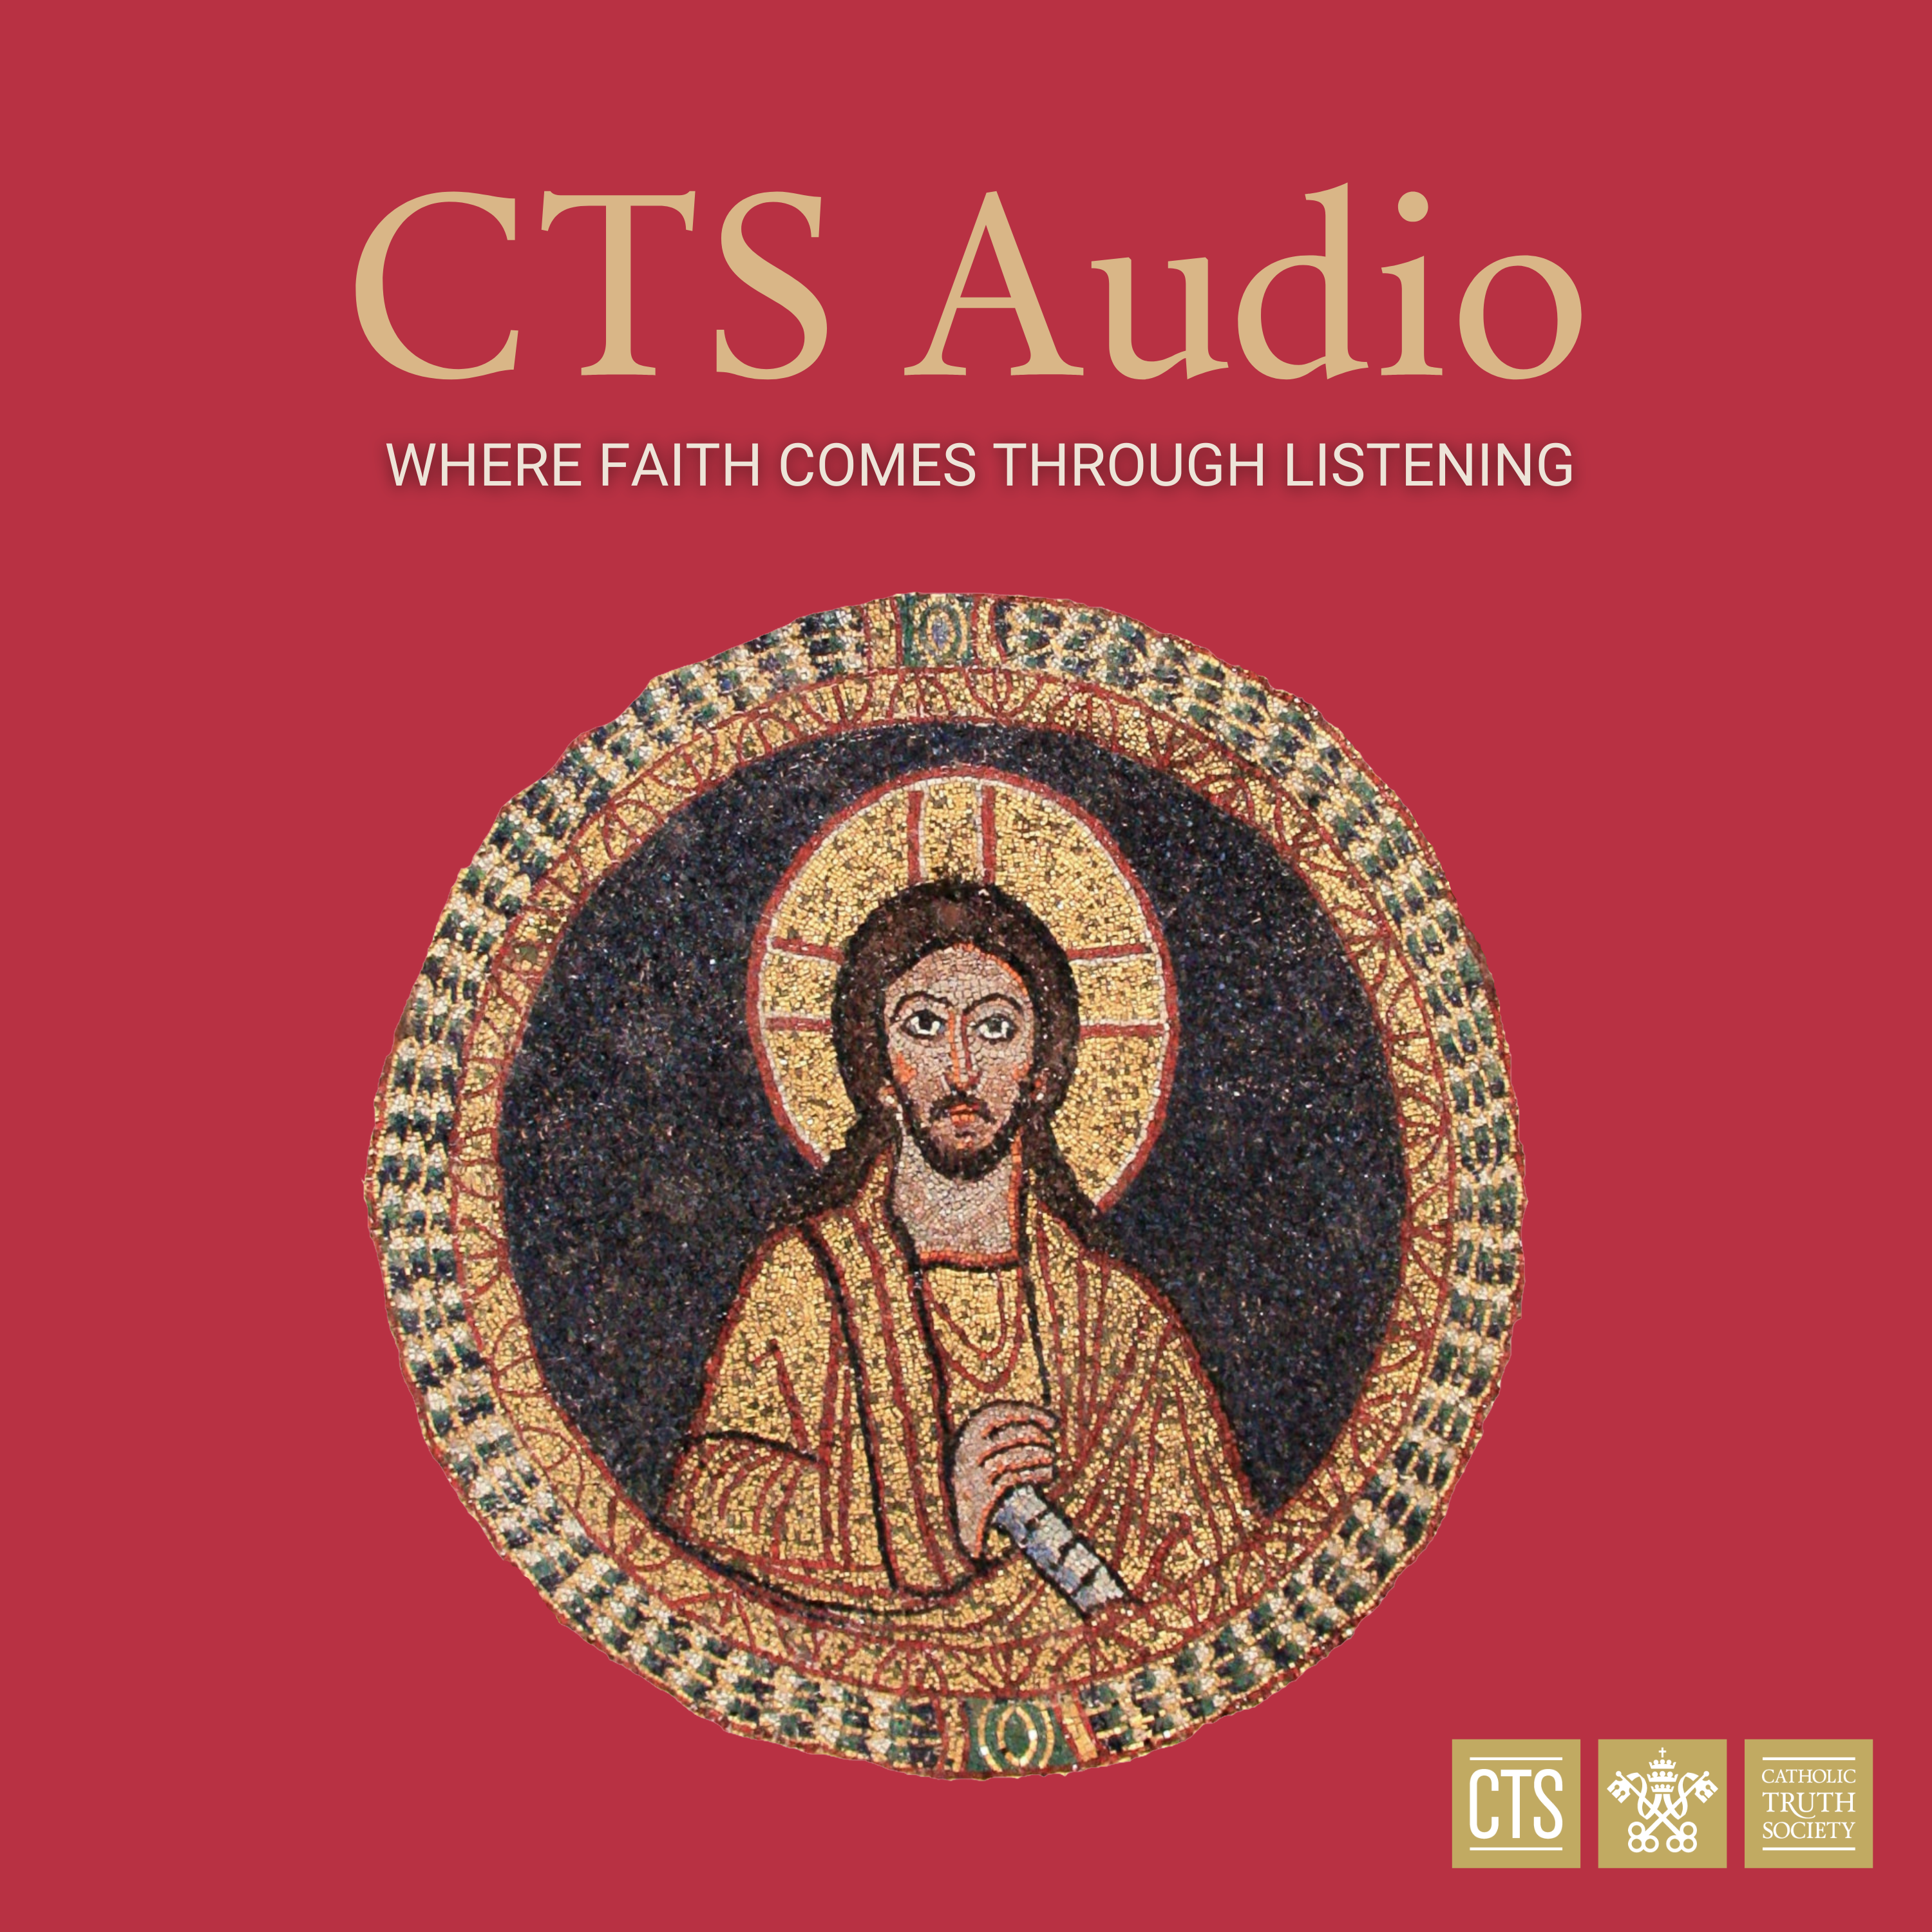 More CTS Audiobooks